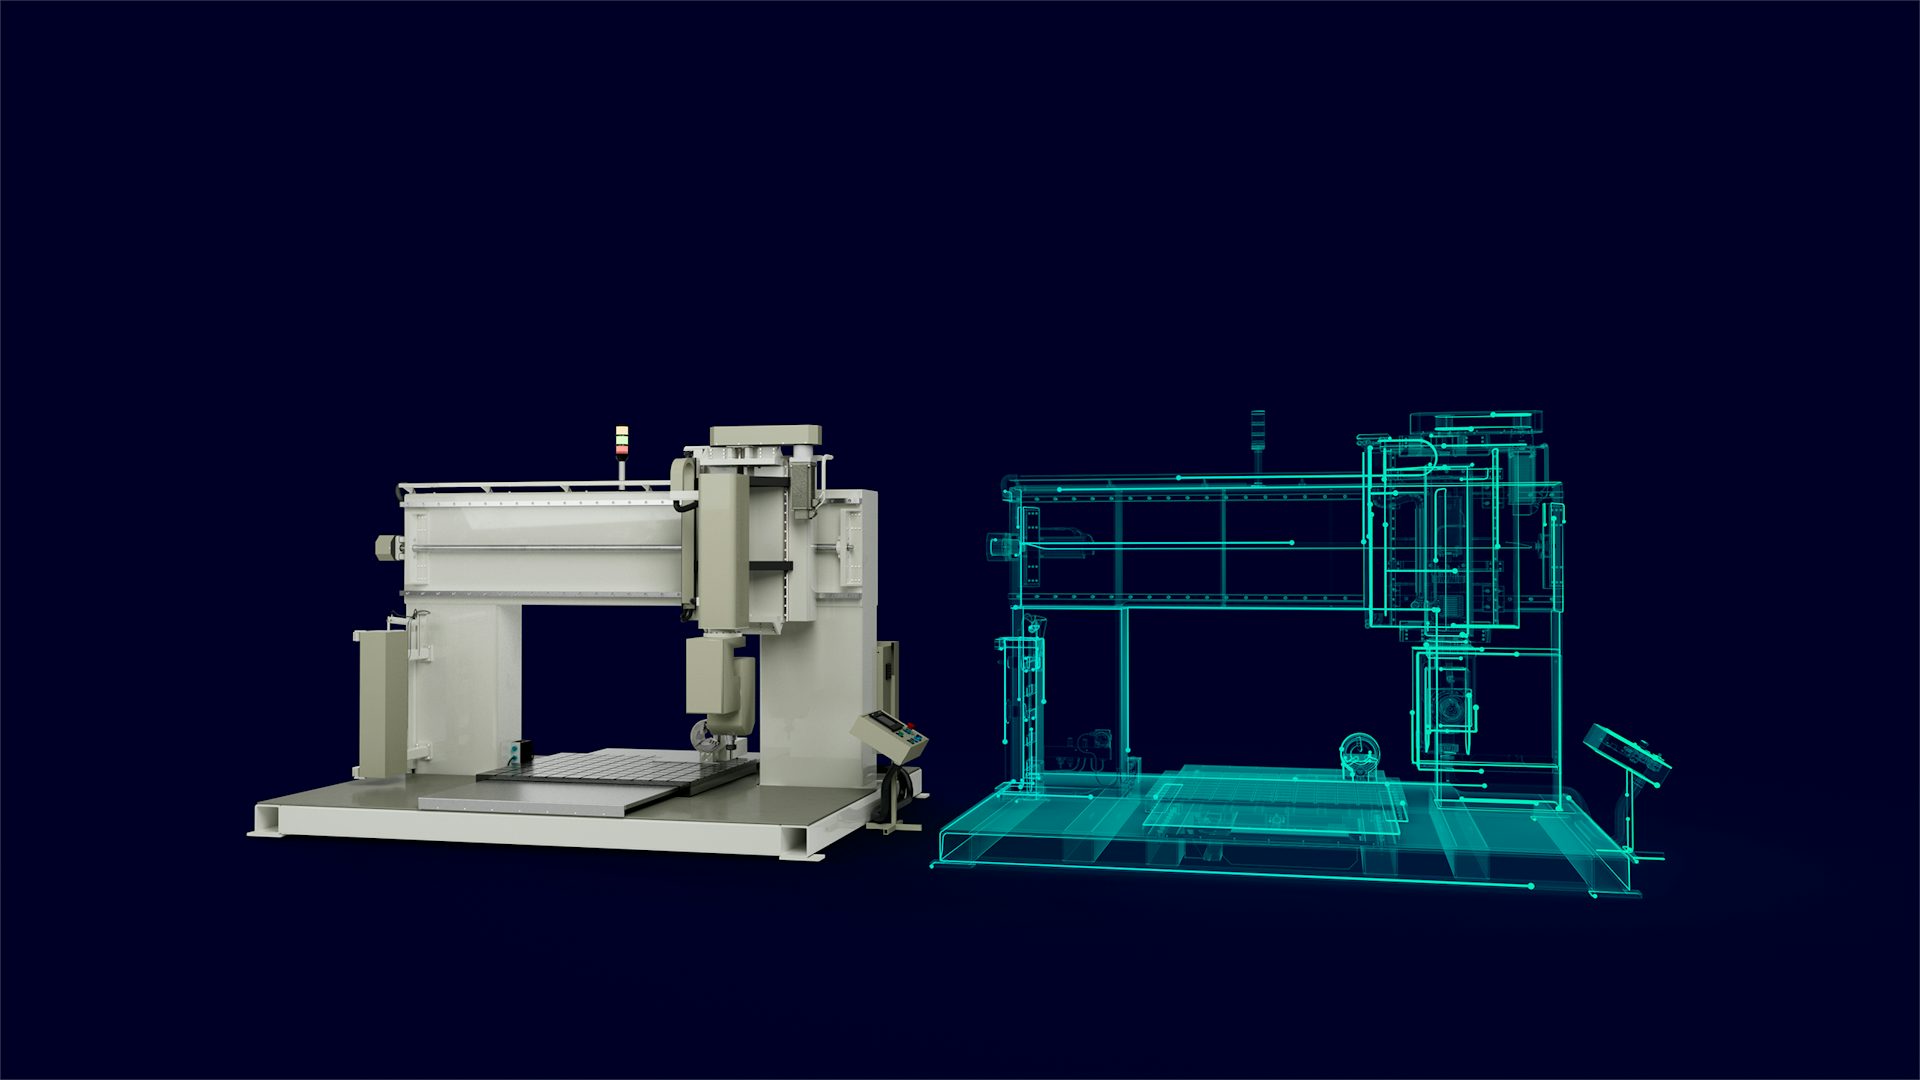 3D mock-up of a machine next to a wireframe of the same machine